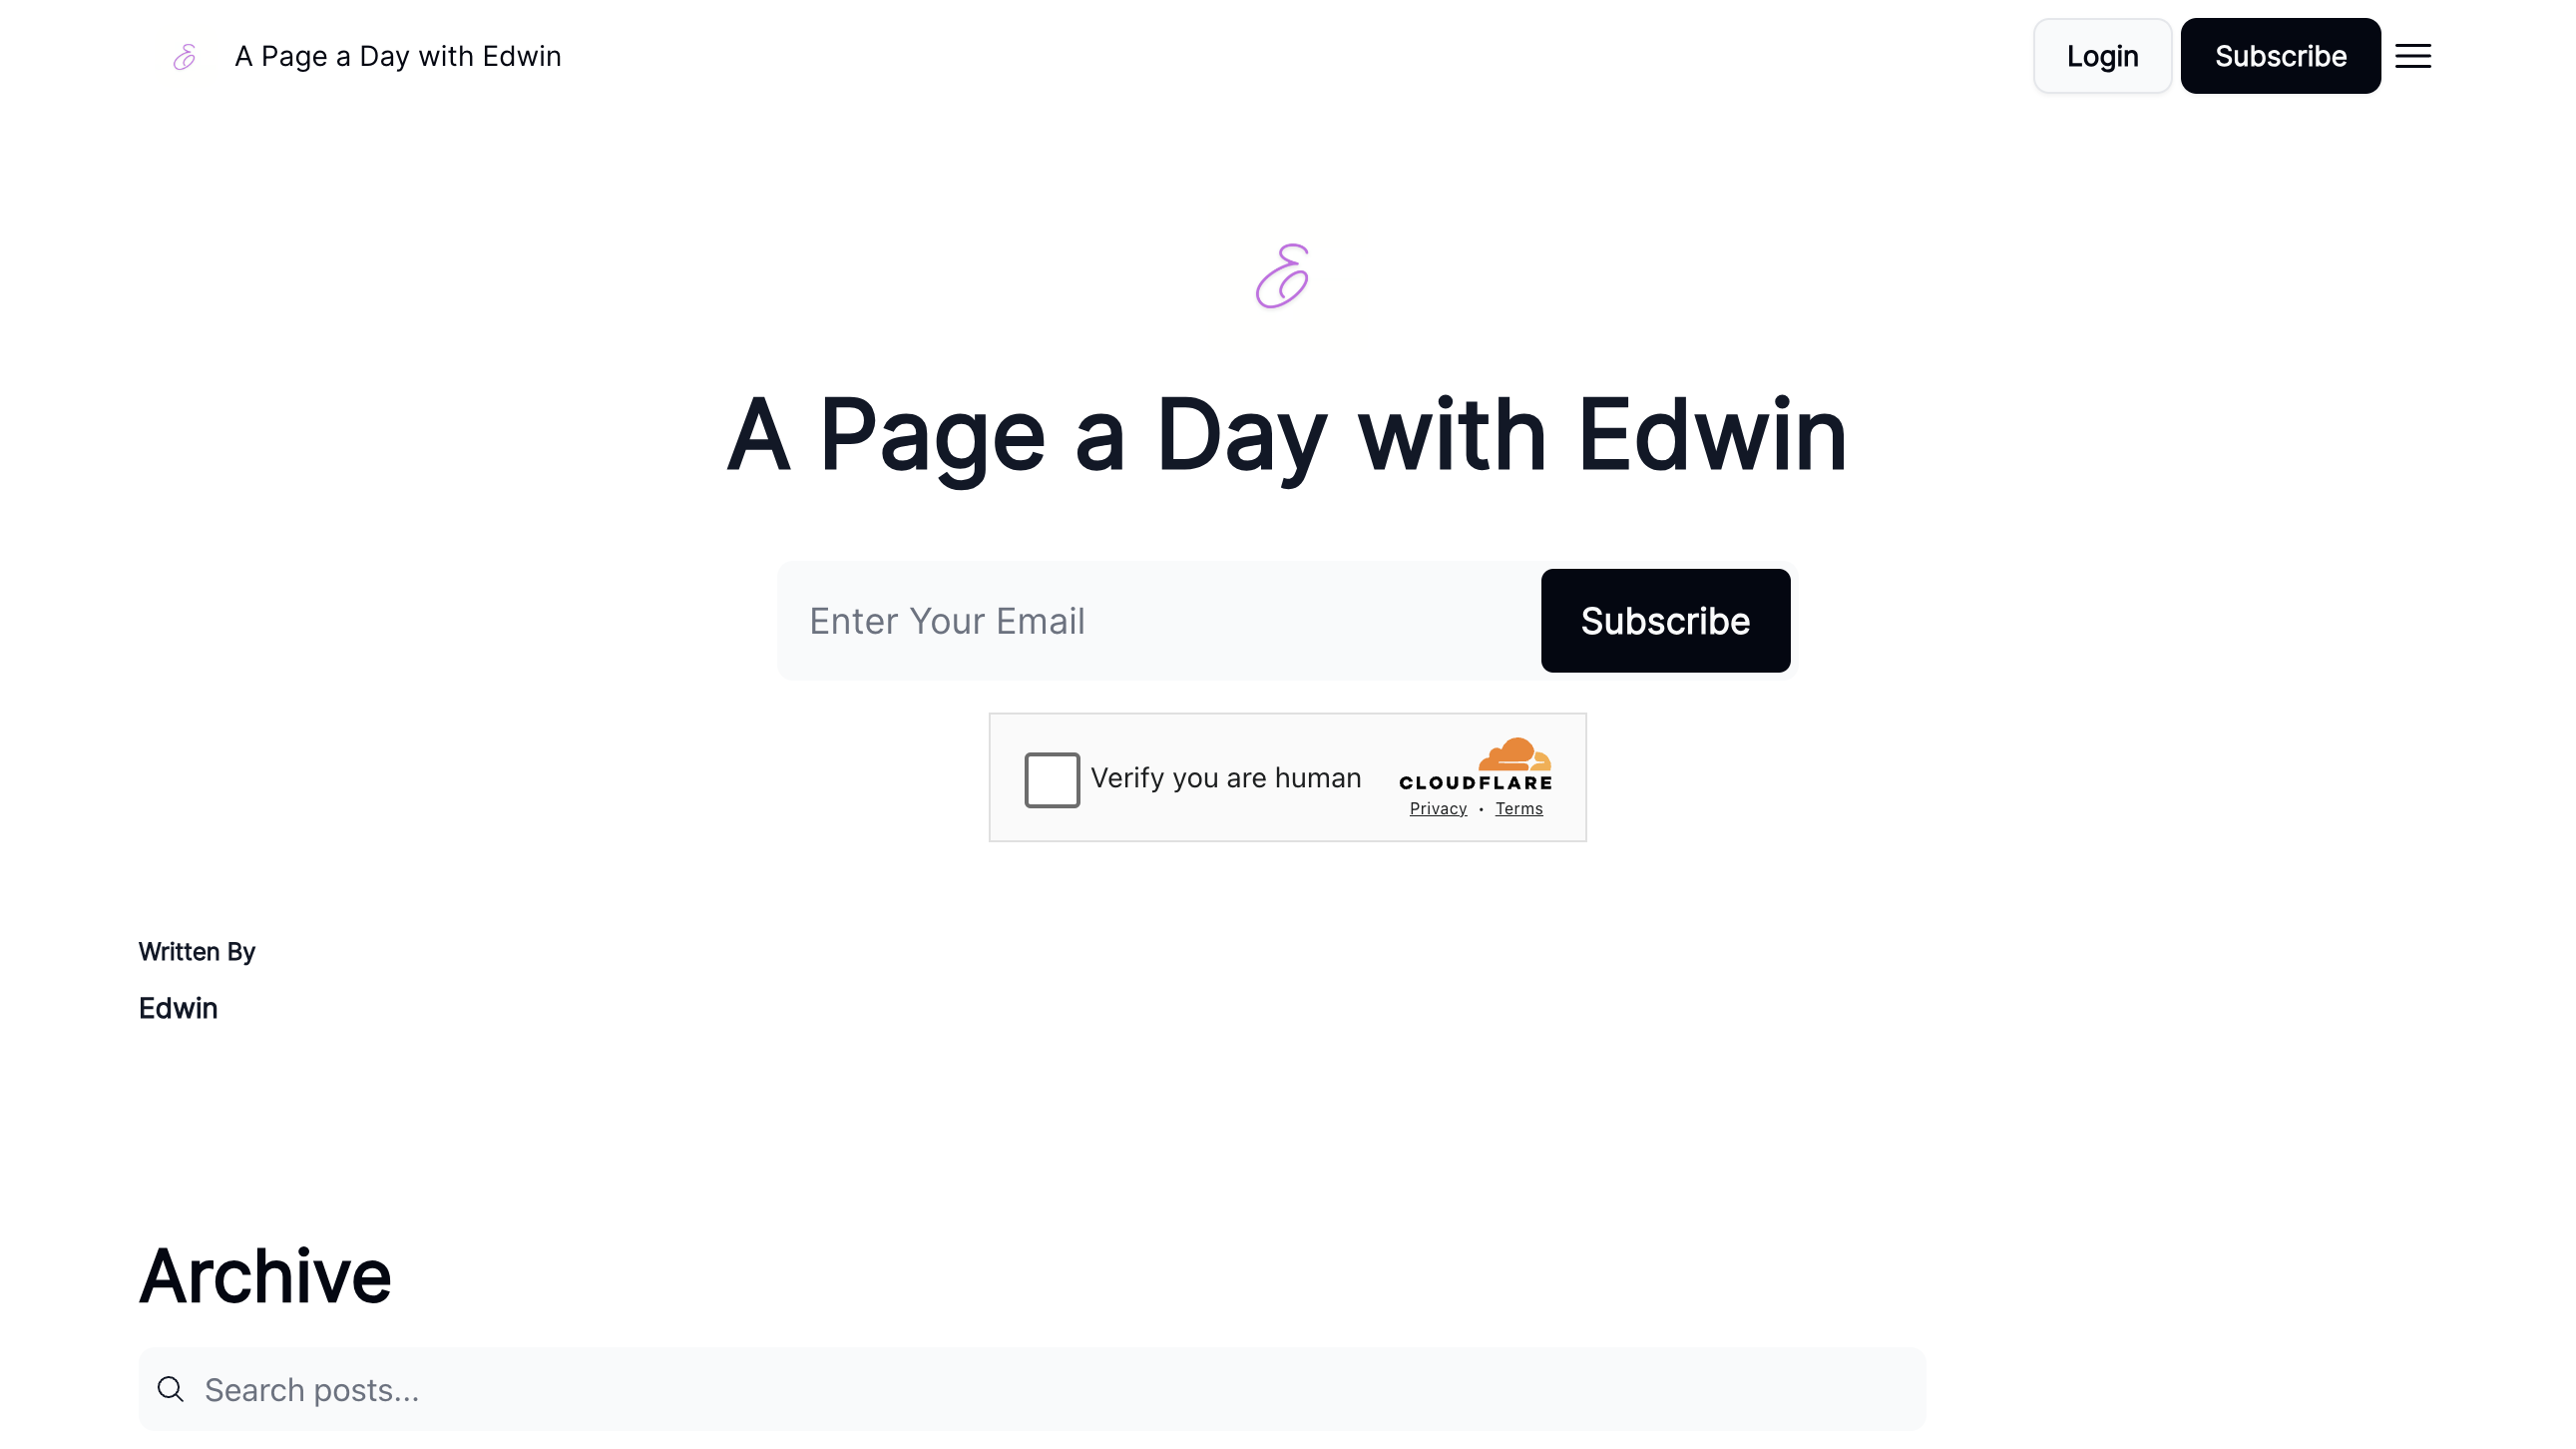 A Page a Day with Edwin homepage